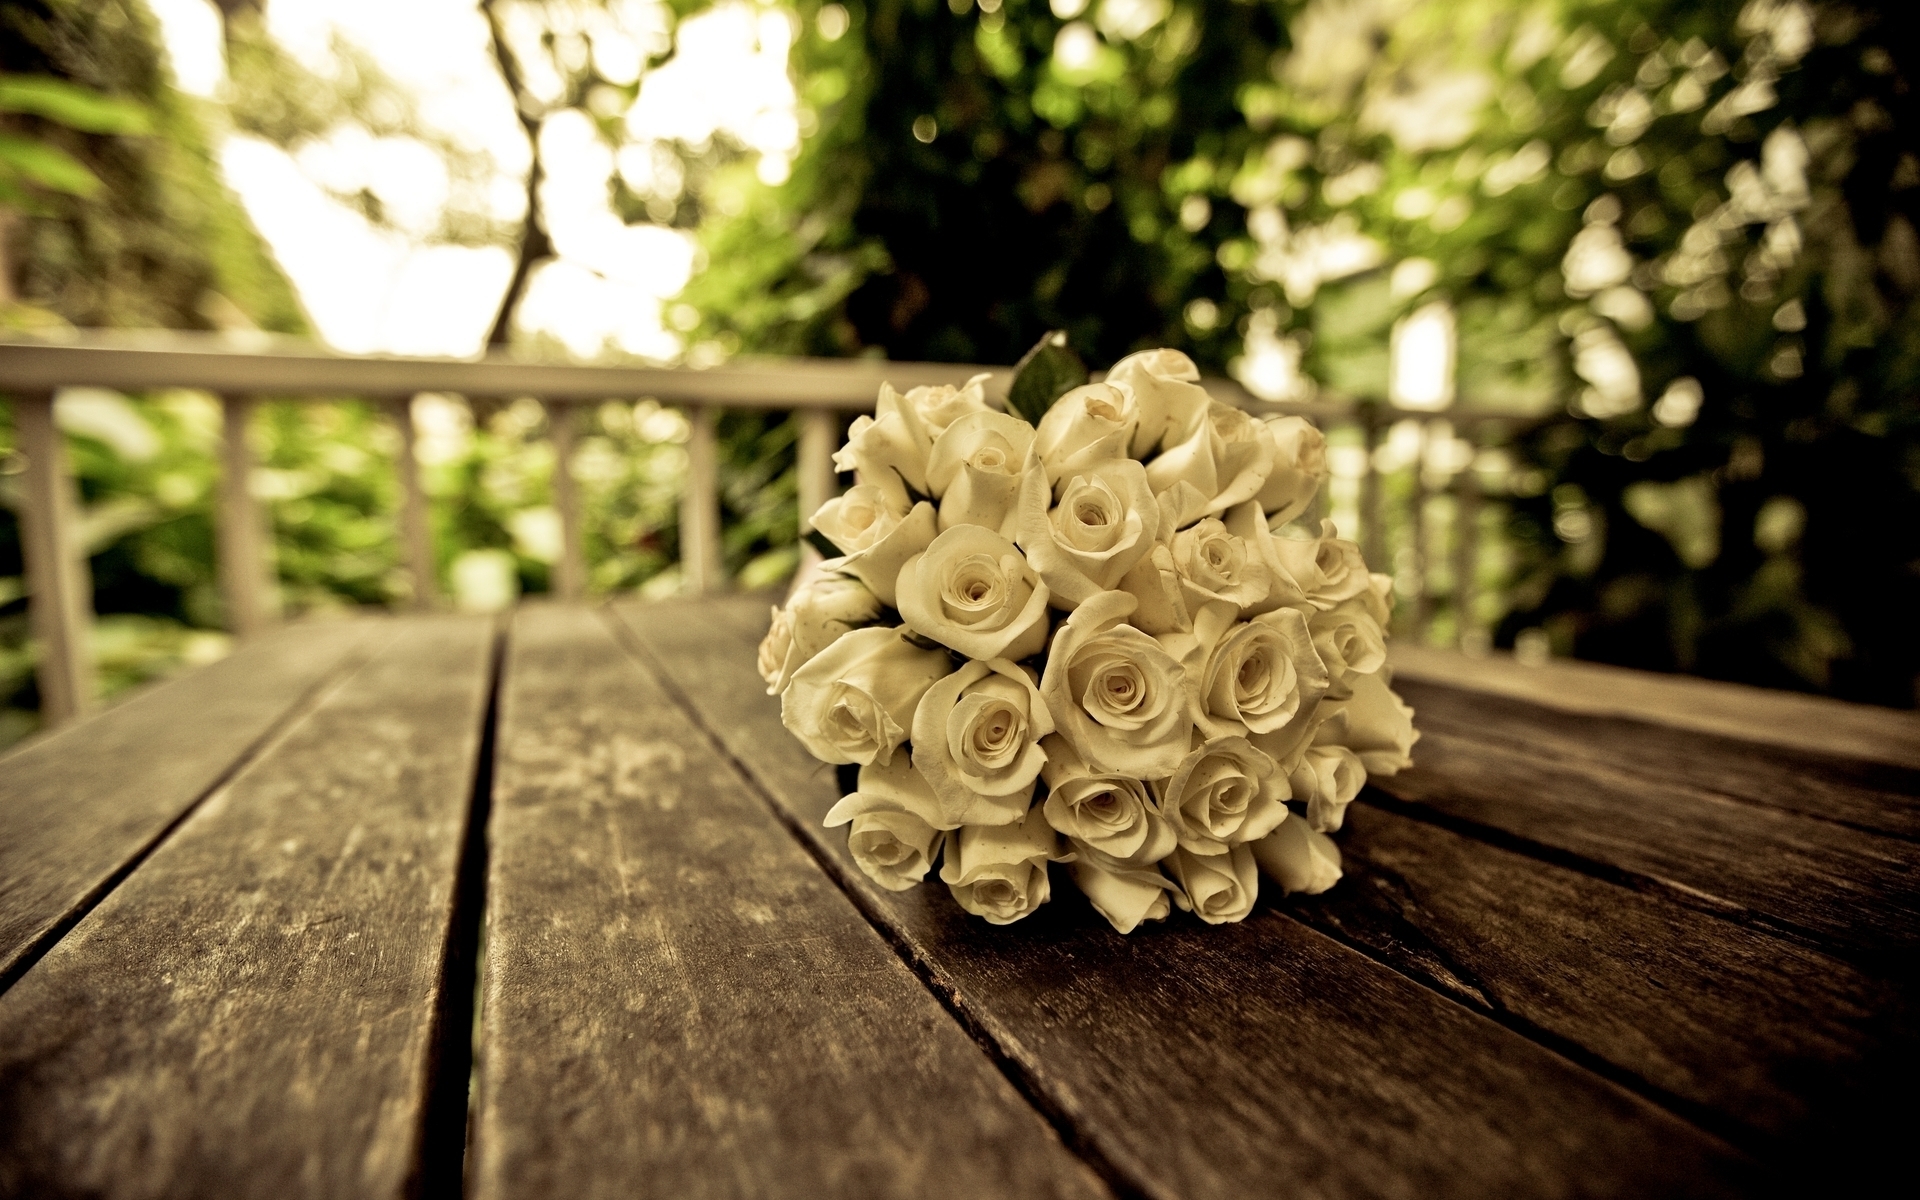 Wedding Roses - Wallpaper, High Definition, High Quality ...